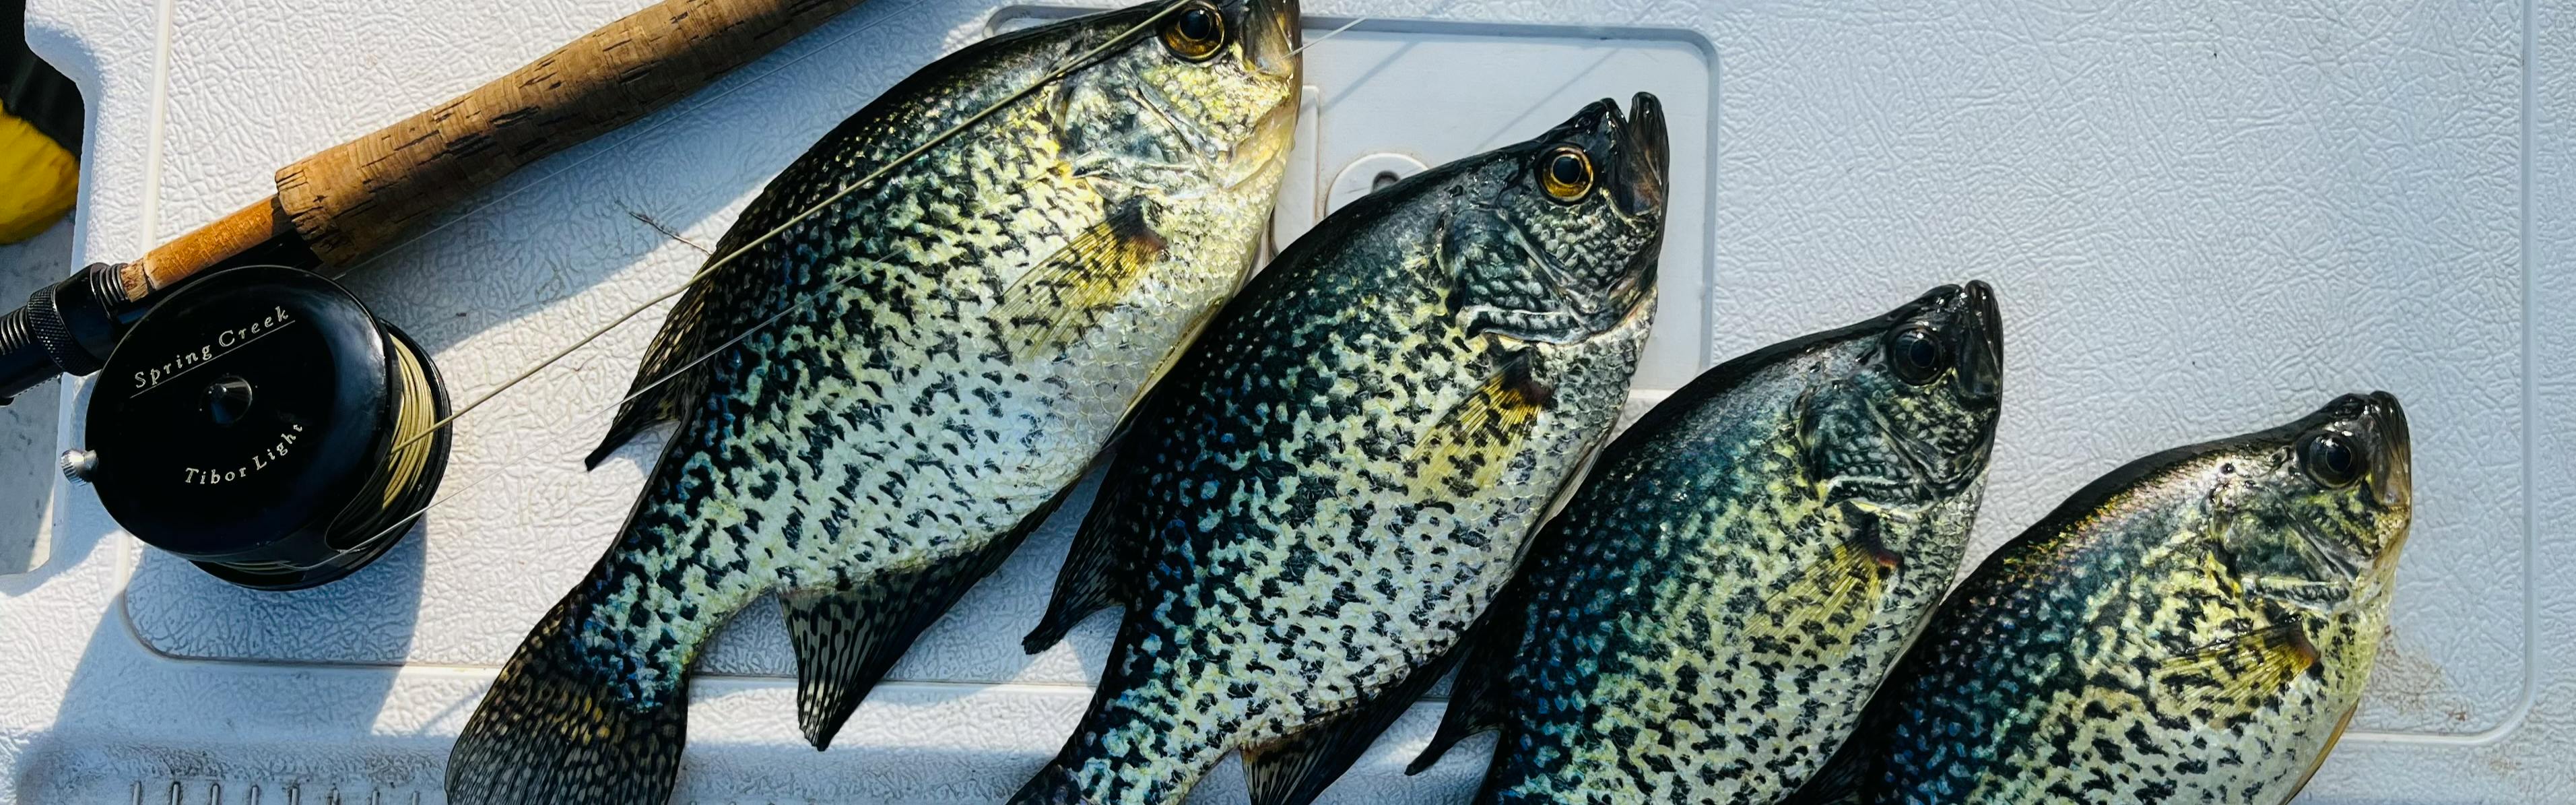 Keep It Simple, Spider Rigs 4 Crappies 